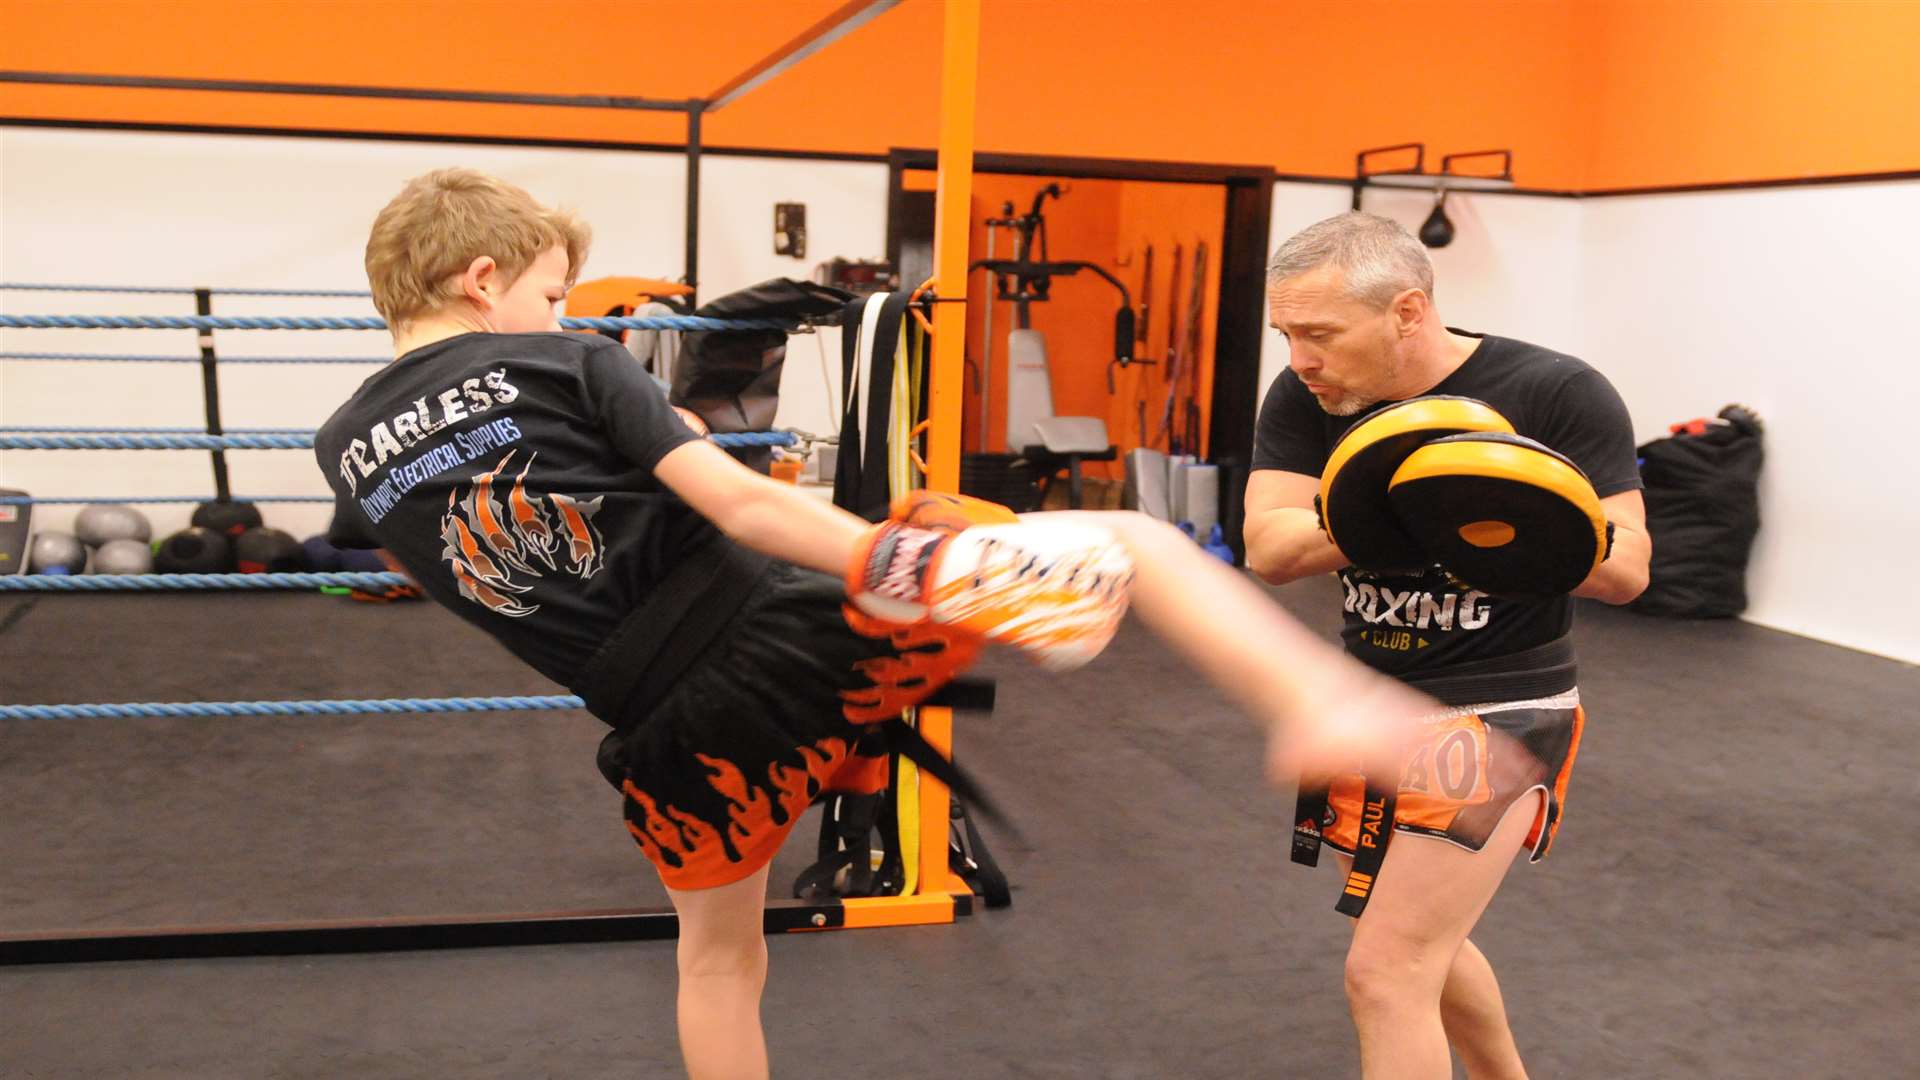 Paul Wiffen Kickboxing Academy, is looking for new premises.